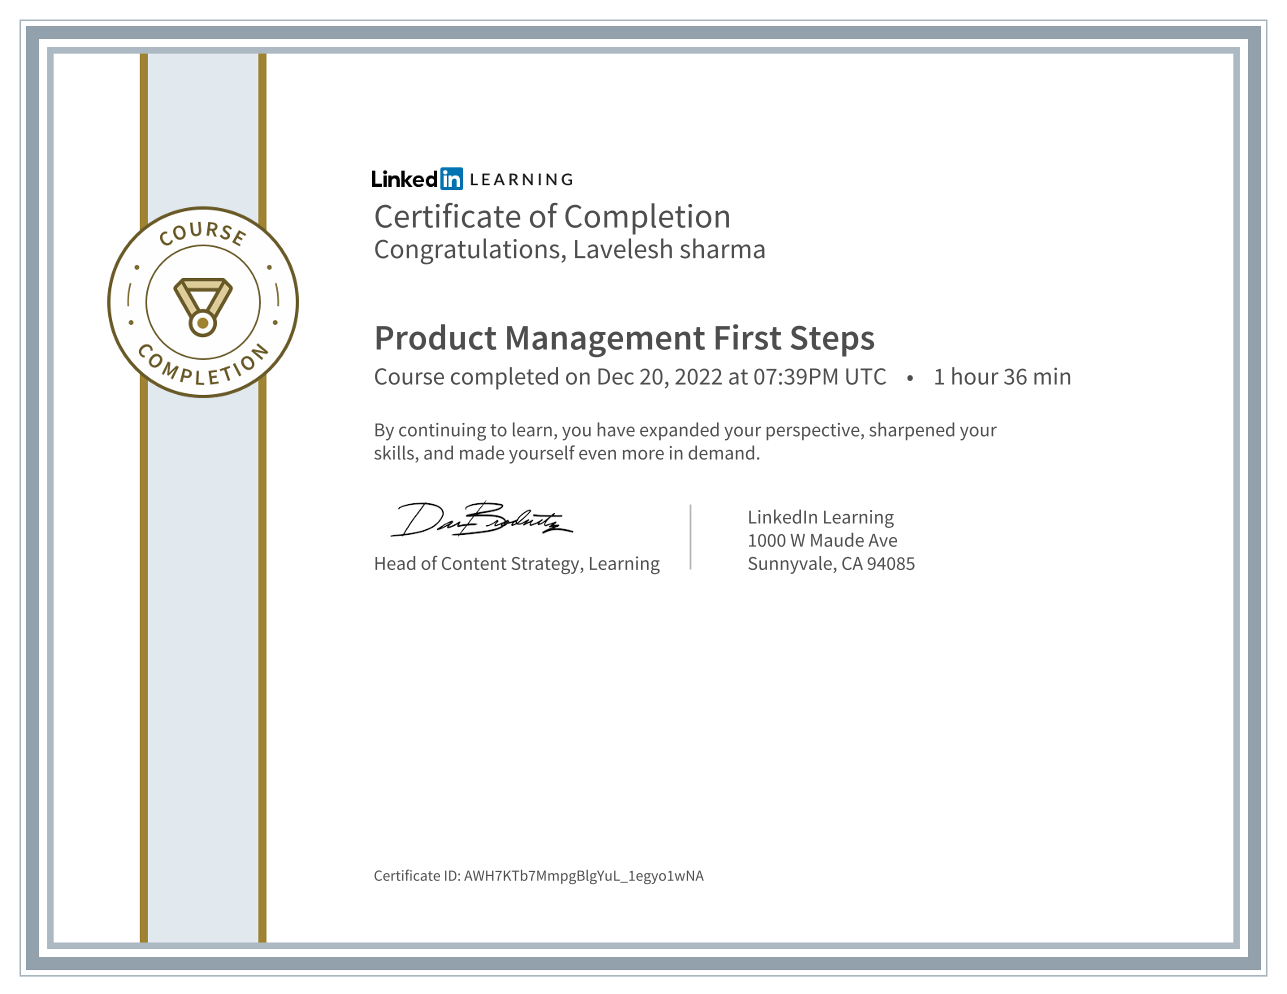 Certificate of completion for Product Management First Steps content earned by Lavelesh sharma